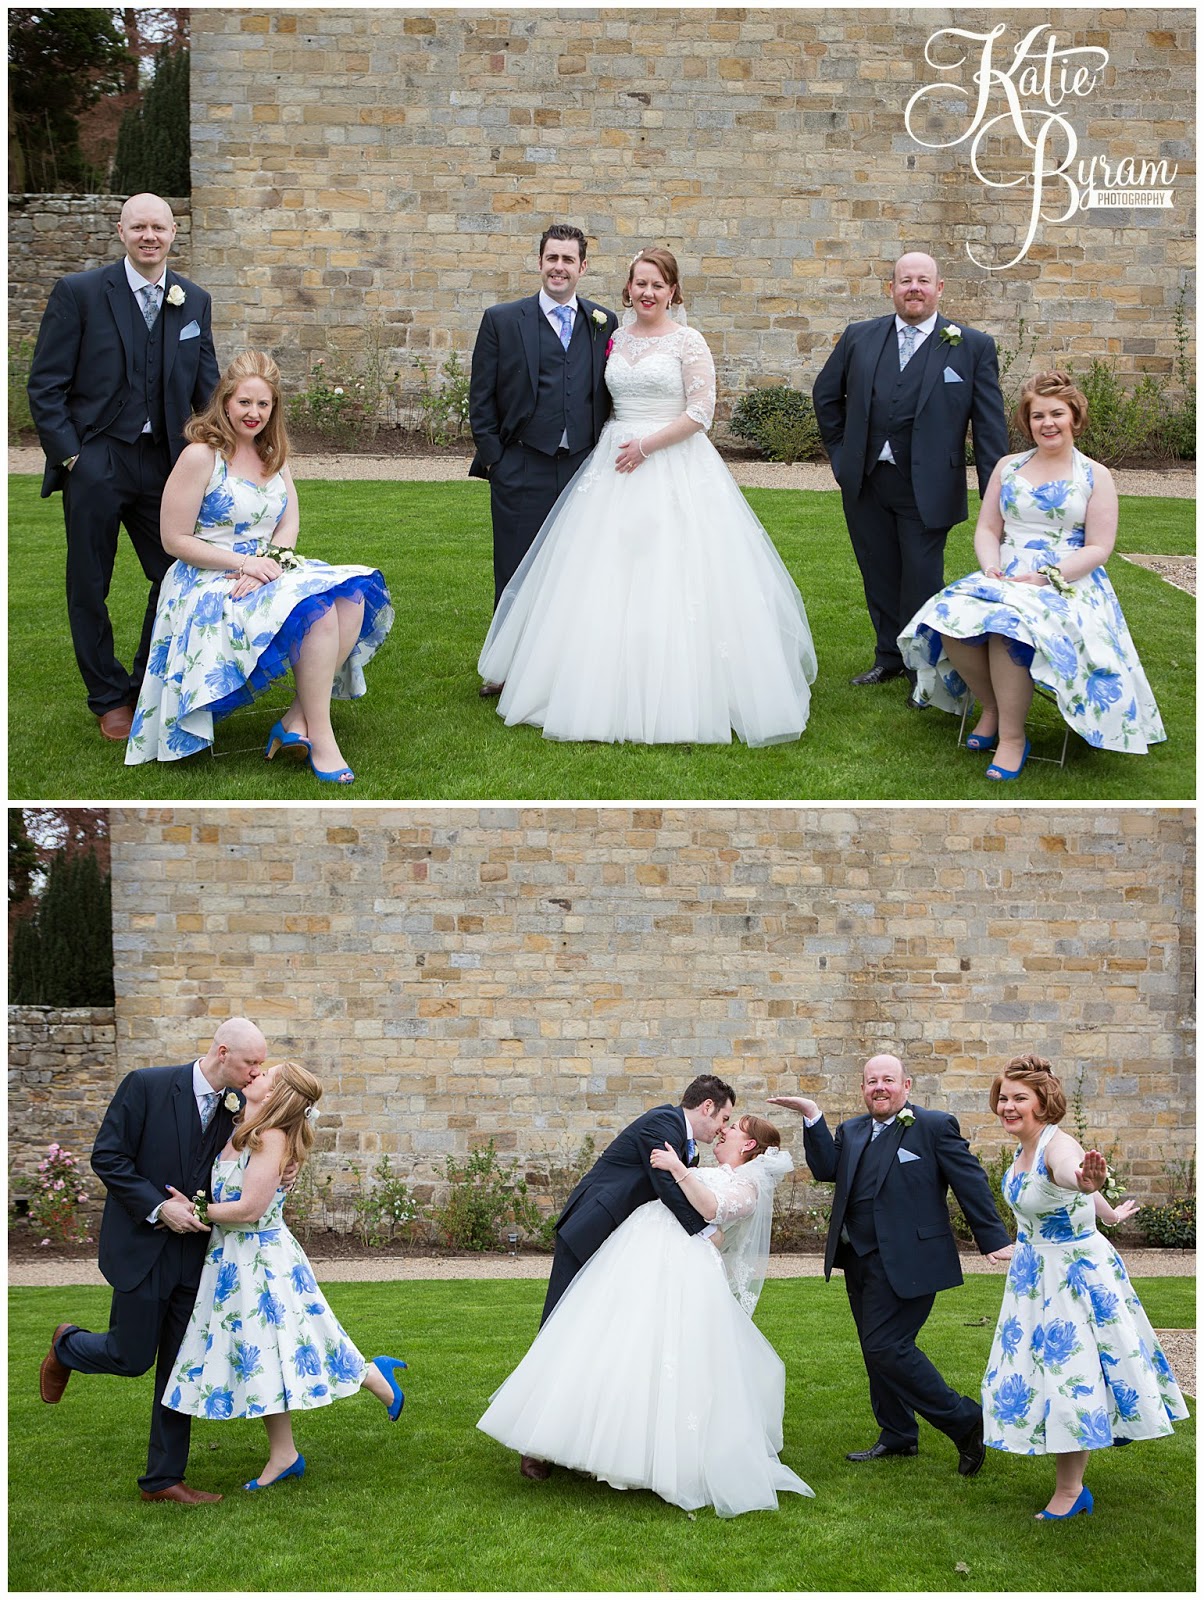 minsteracres wedding, lord crewe arms wedding, dog at wedding, scoops and smiles, katie byram photography, ice cream van hire newcastle, newcastle wedding photography, relaxed wedding photography, quirky, 50